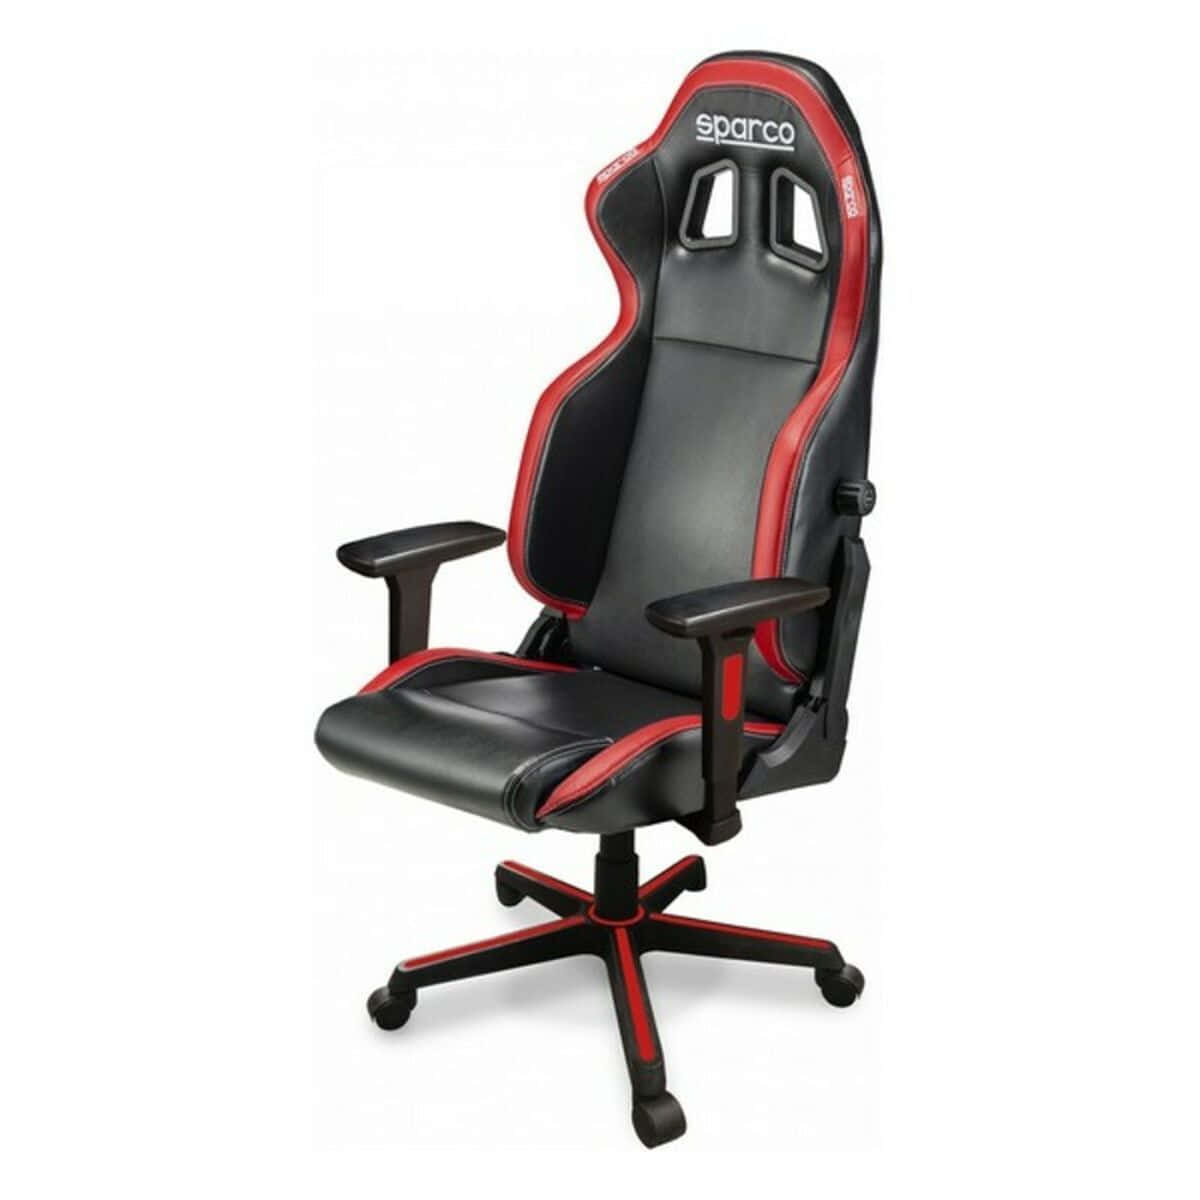 Get Ready to Play in Comfort&Style with a High-End Gaming Chair Wallpaper